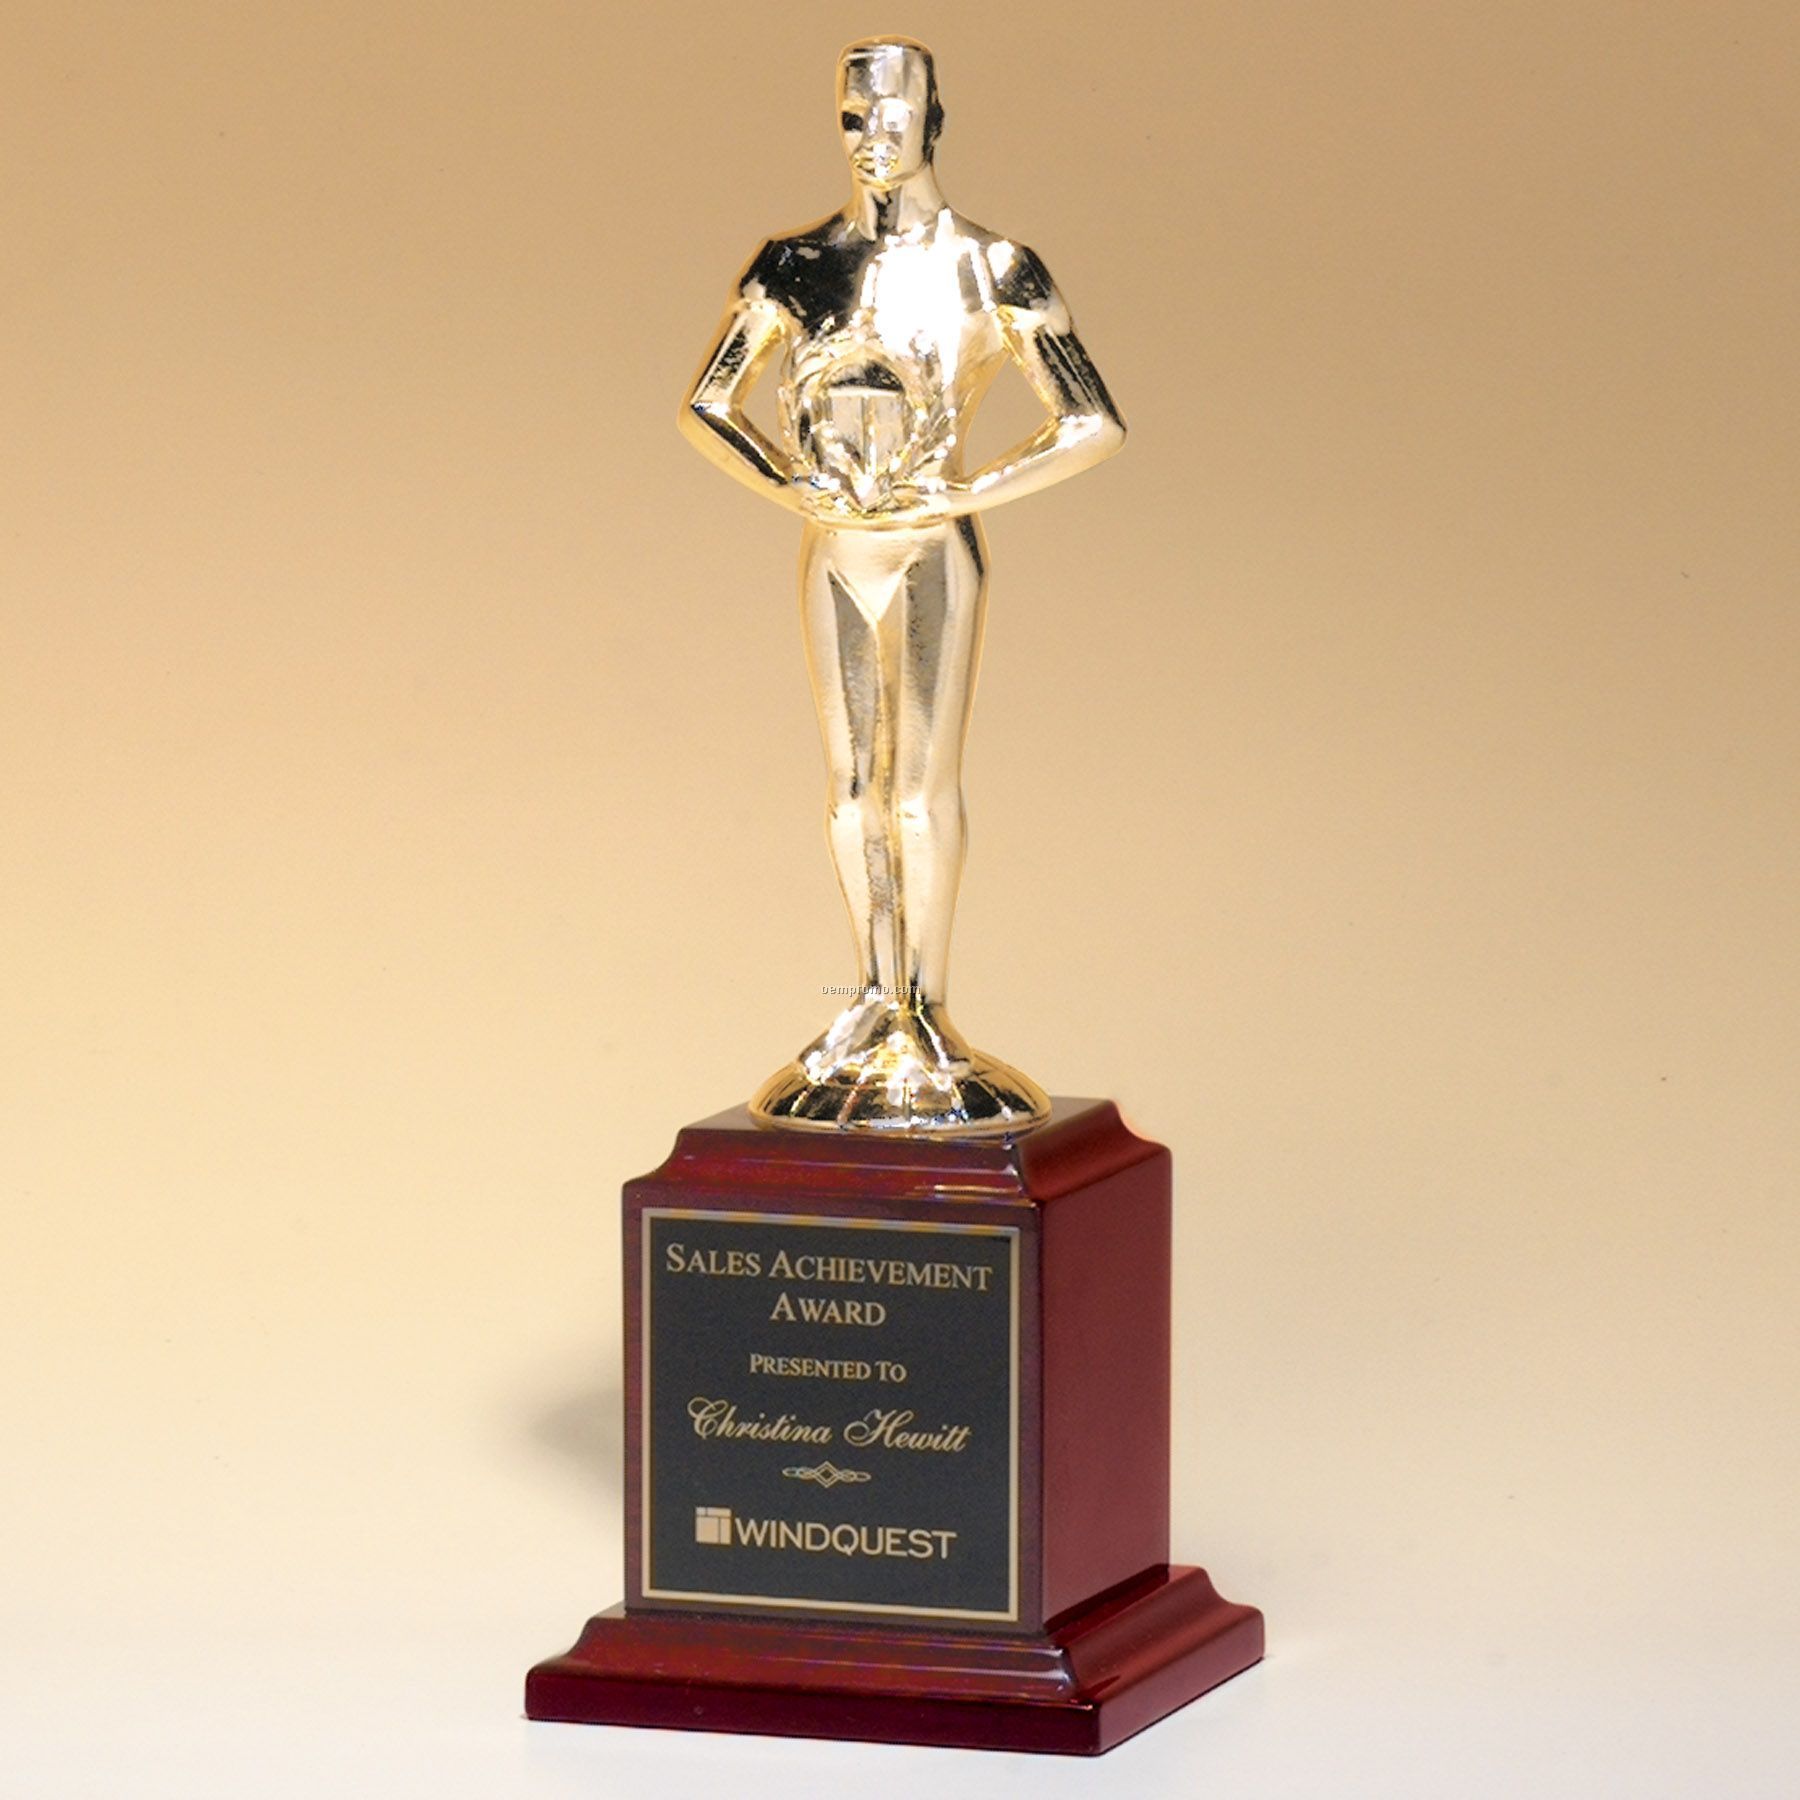 Cast Metal 9" Trophy Of Classic Achiever Figure On Rosewood Stained Base